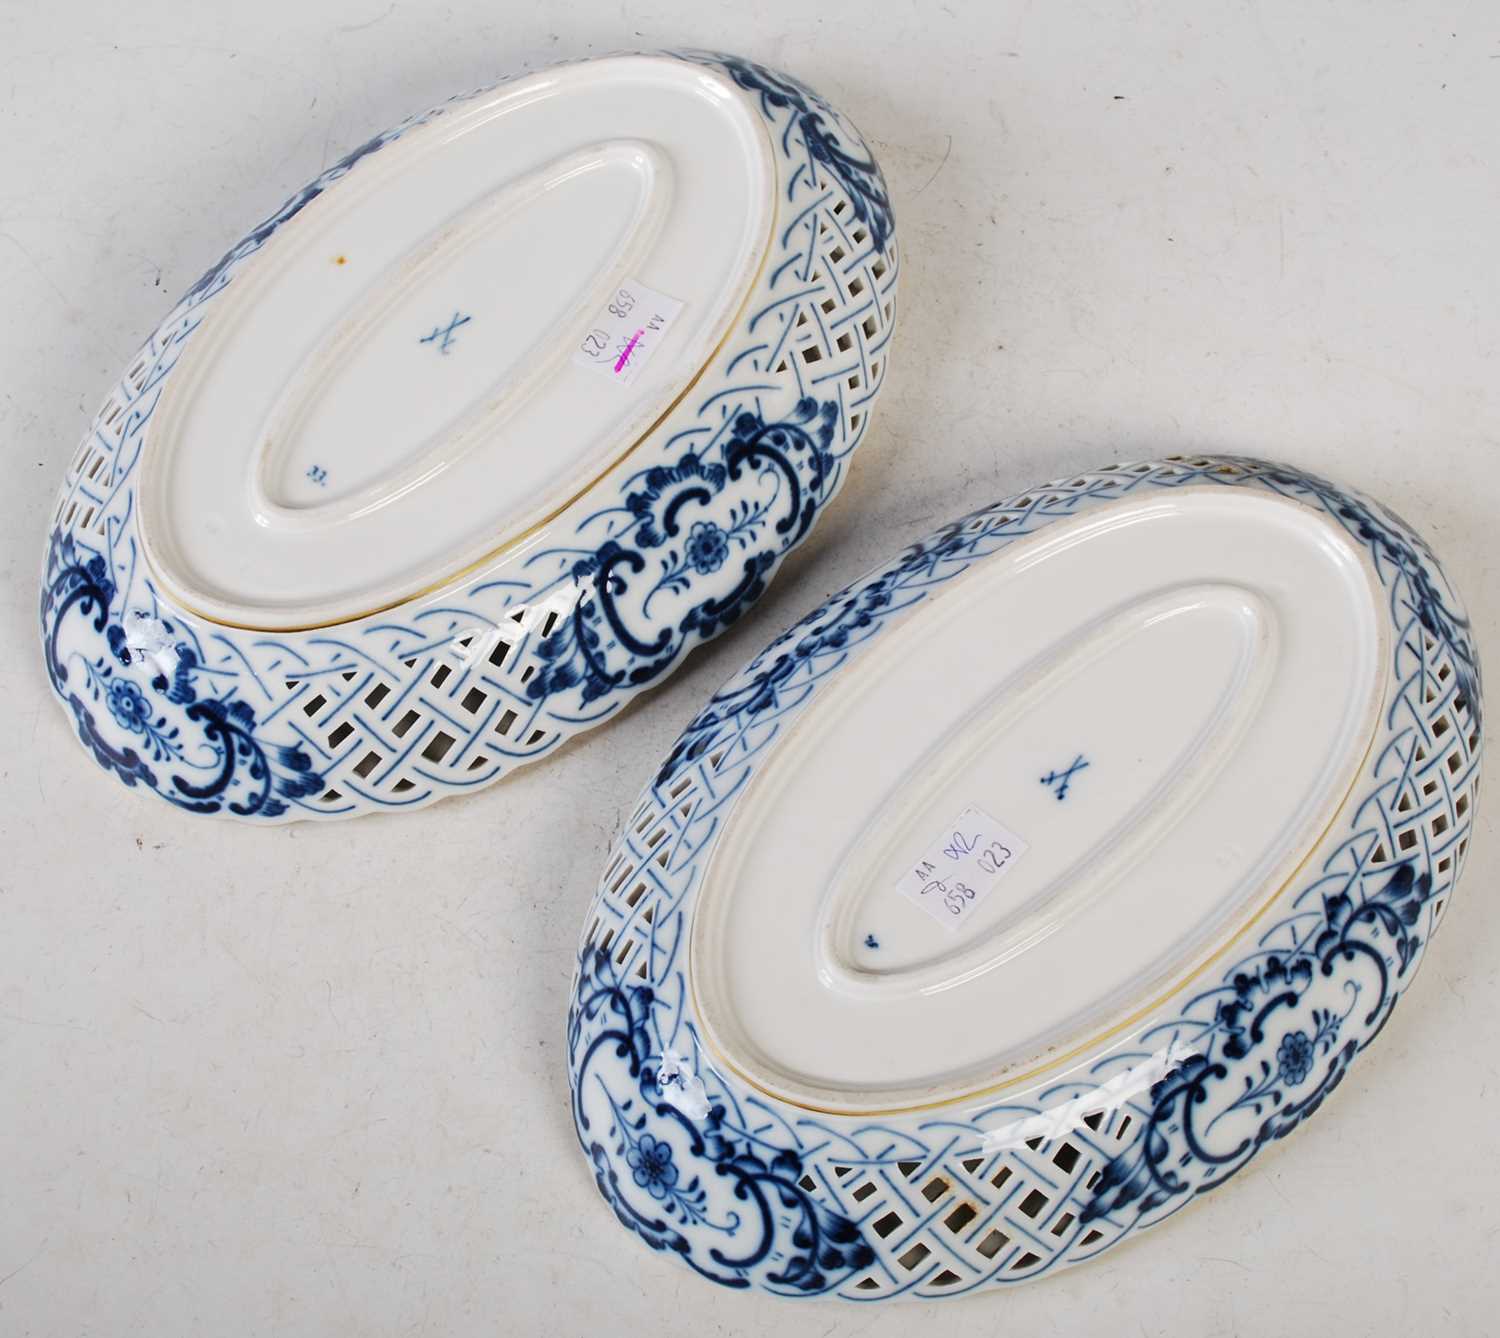 A pair of Meissen porcelain, blue and white onion pattern oval shaped dishes, with pierced rims - Image 2 of 3